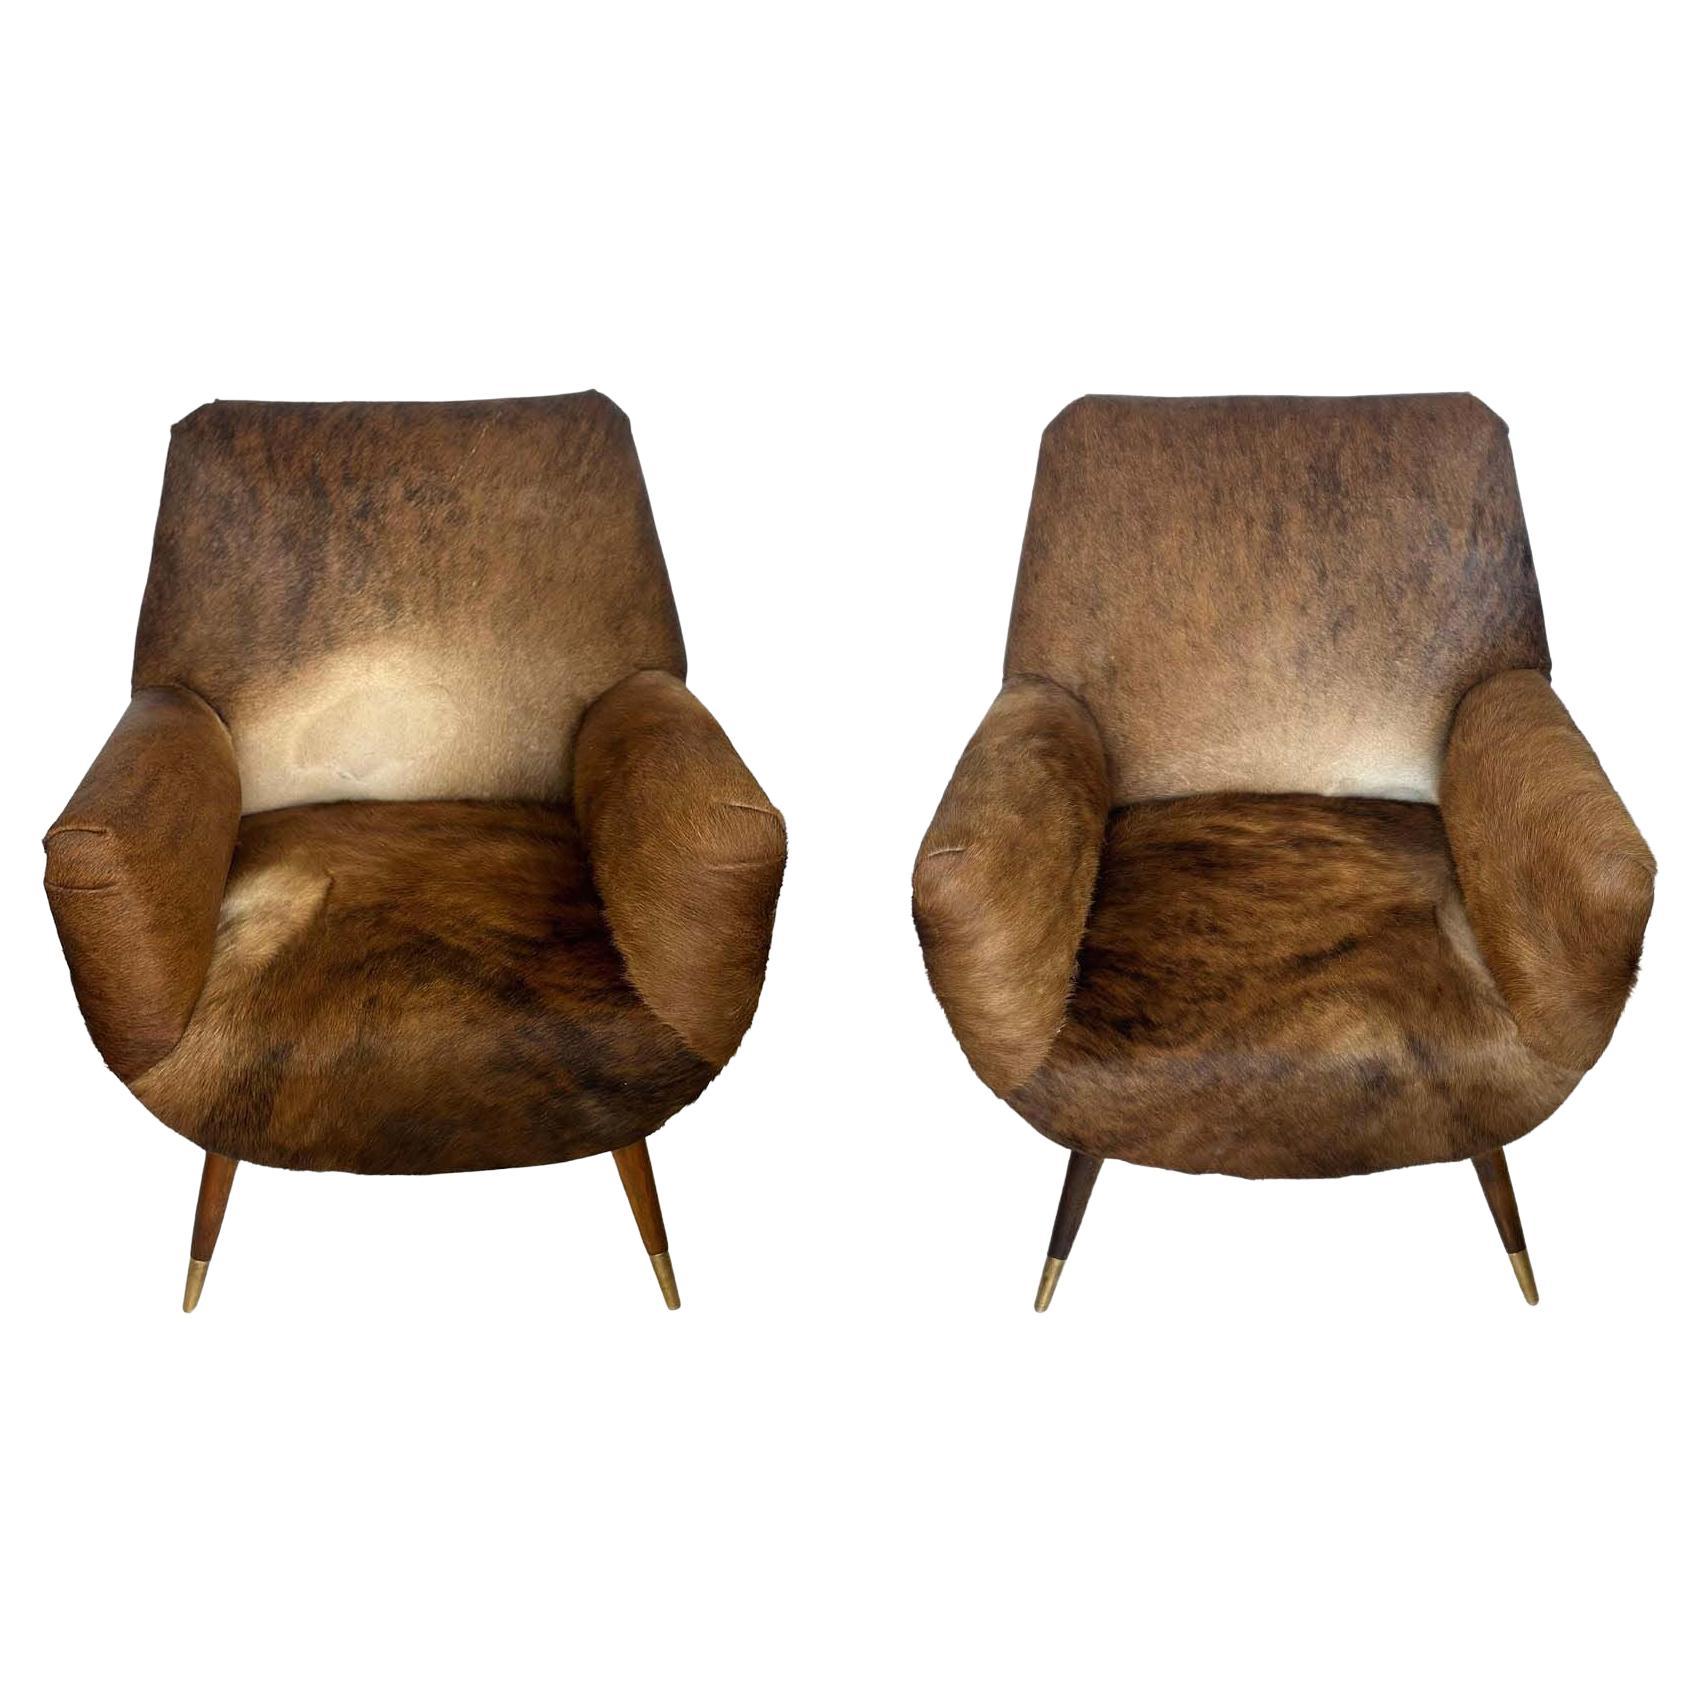 Pair of Mid-Century Italian Cowhide Chairs in the Style of Gio Ponti For Sale